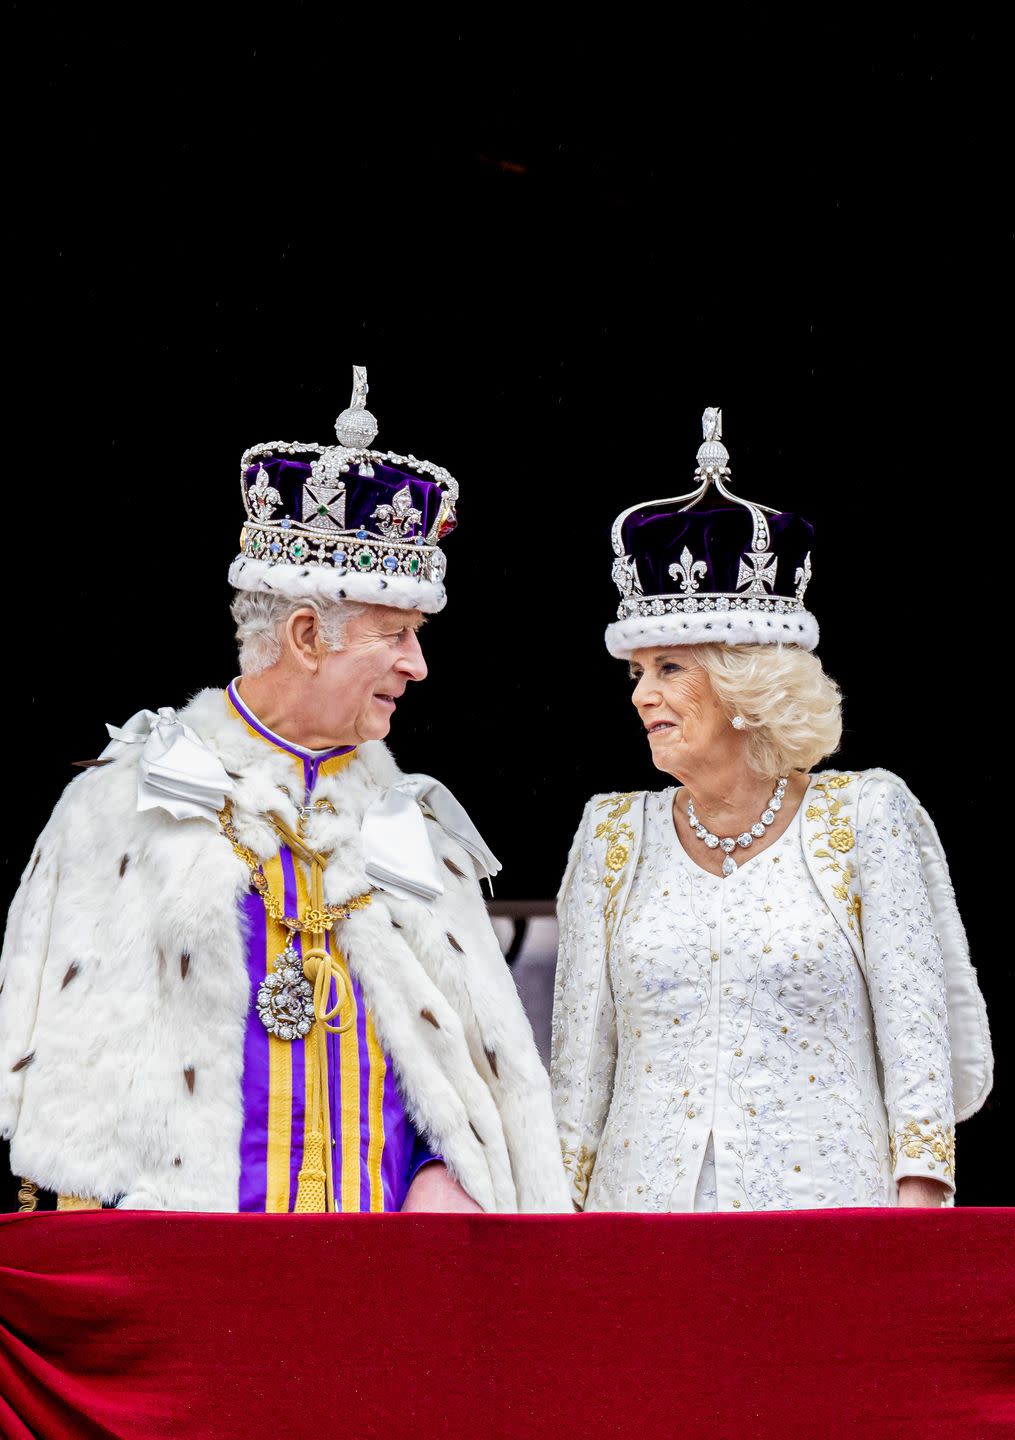 london, england may 6 king charles iii and queen camilla at the balcony of buckingham palace following the coronation of king charles iii and queen camilla on may 6, 2023 in london, england the coronation of charles iii and his wife, camilla, as king and queen of the united kingdom of great britain and northern ireland, and the other commonwealth realms takes place at westminster abbey today charles acceded to the throne on 8 september 2022, upon the death of his mother, elizabeth ii photo by p van katwijkgetty images